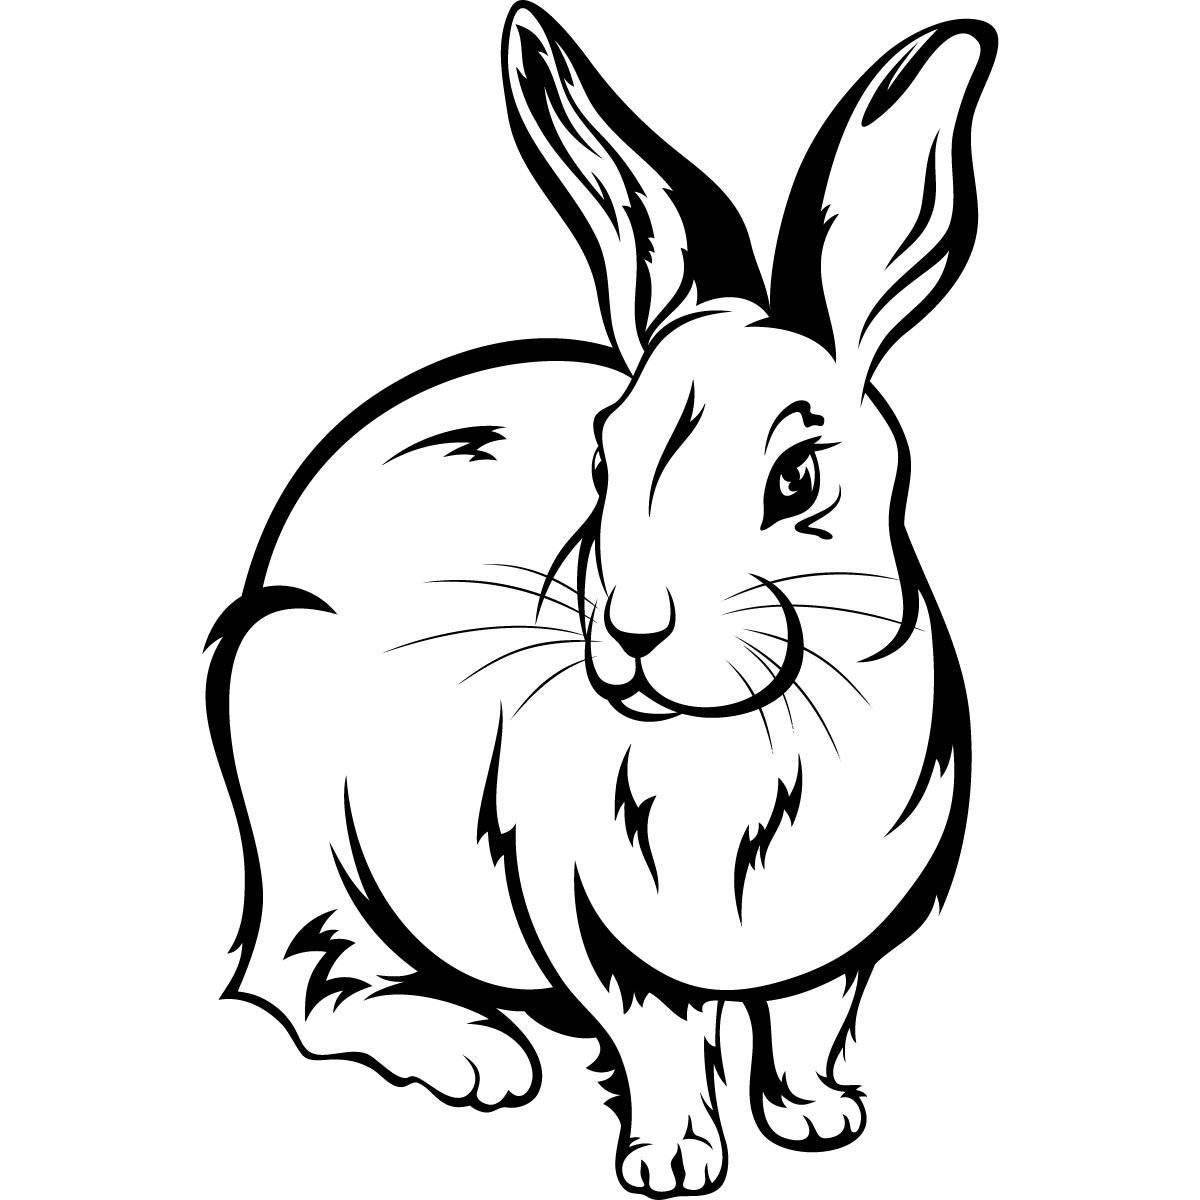 Coloring book shiny hare